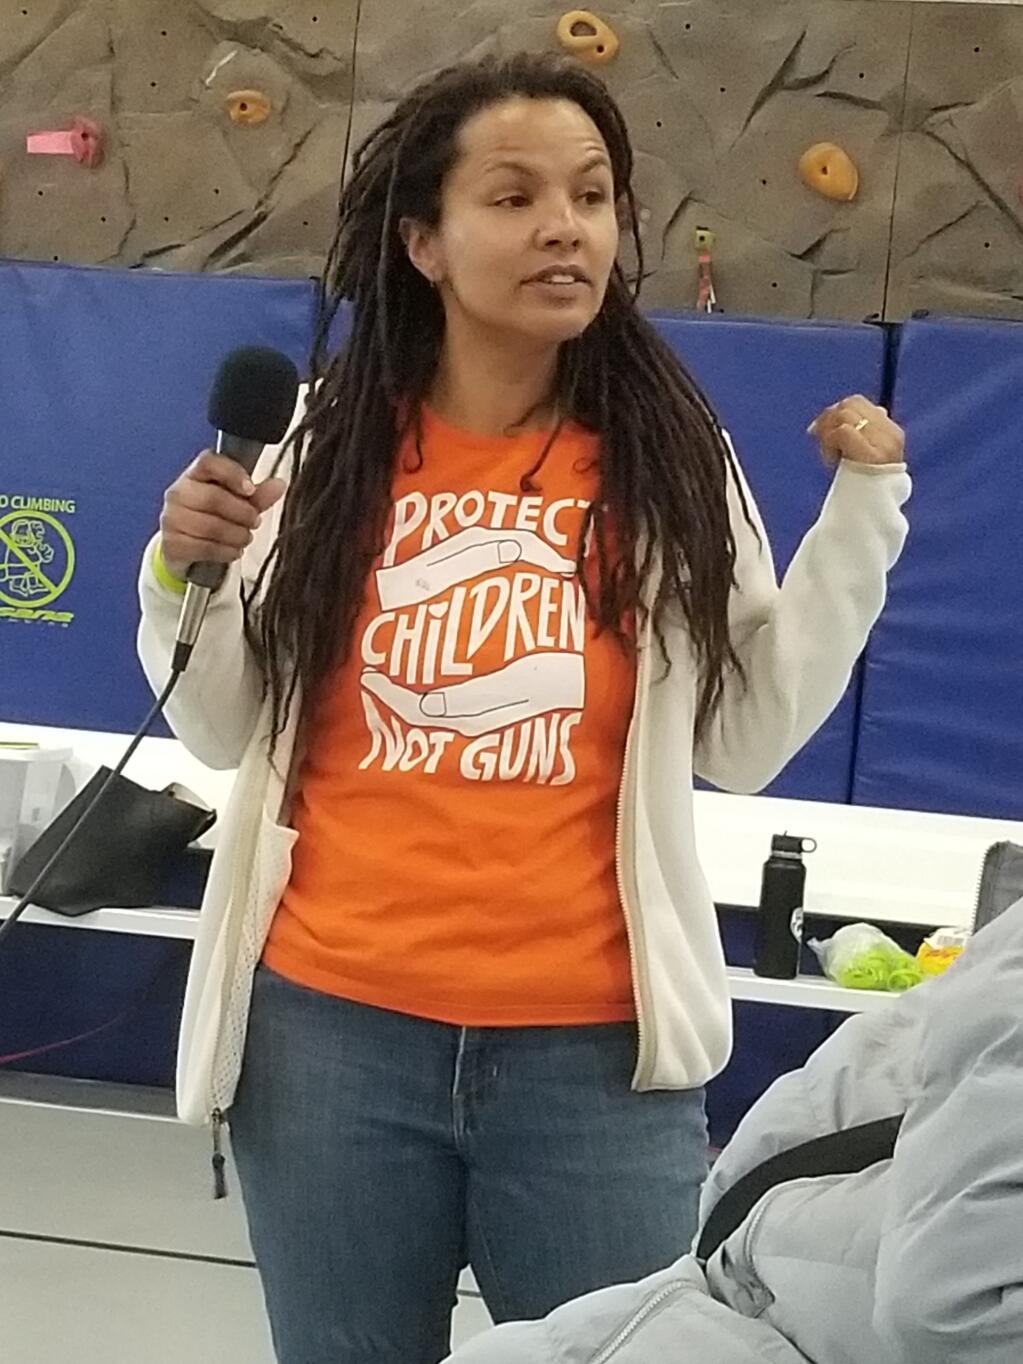 Miriam Bresnyan, mother of a student in the Sonoma Valley Unified School District, speaks at the Sonoma Safety Community Forum, which took place on Monday, April 17 at the Boys & GIrls Clubs of Sonoma Valley.